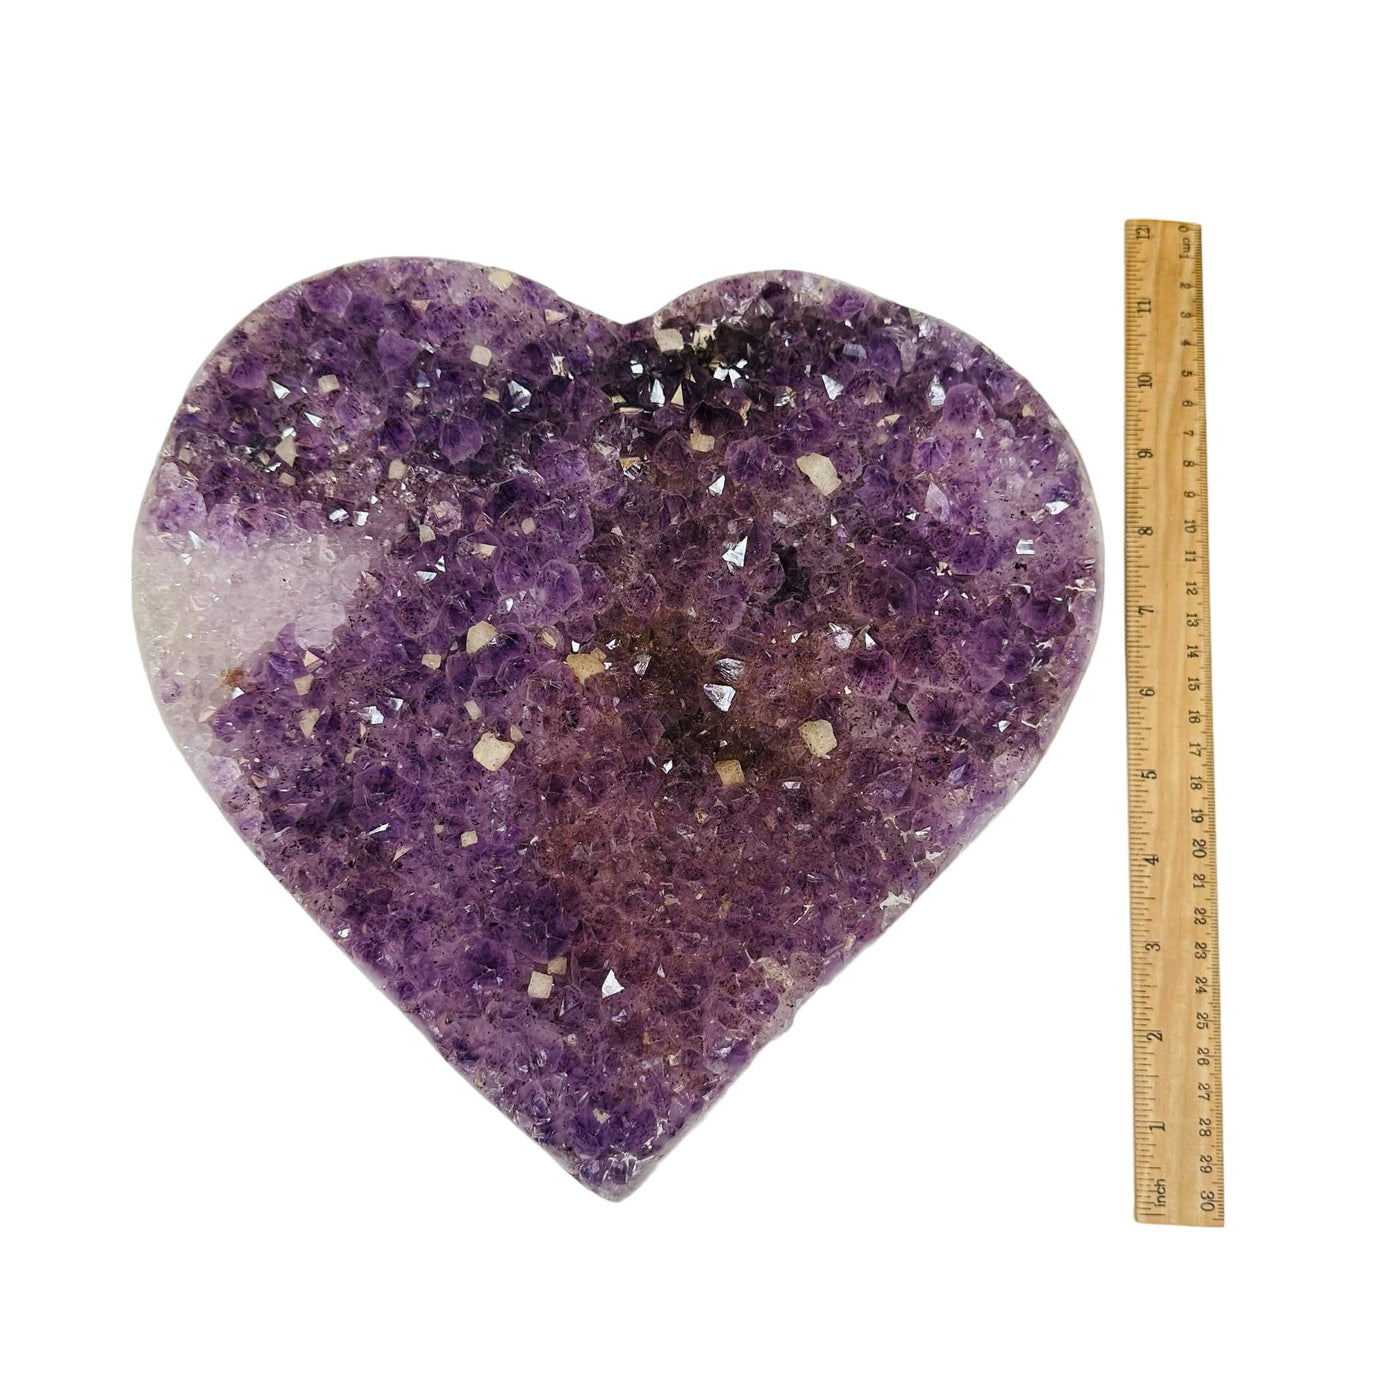 amethyst heart next to a ruler for size reference 